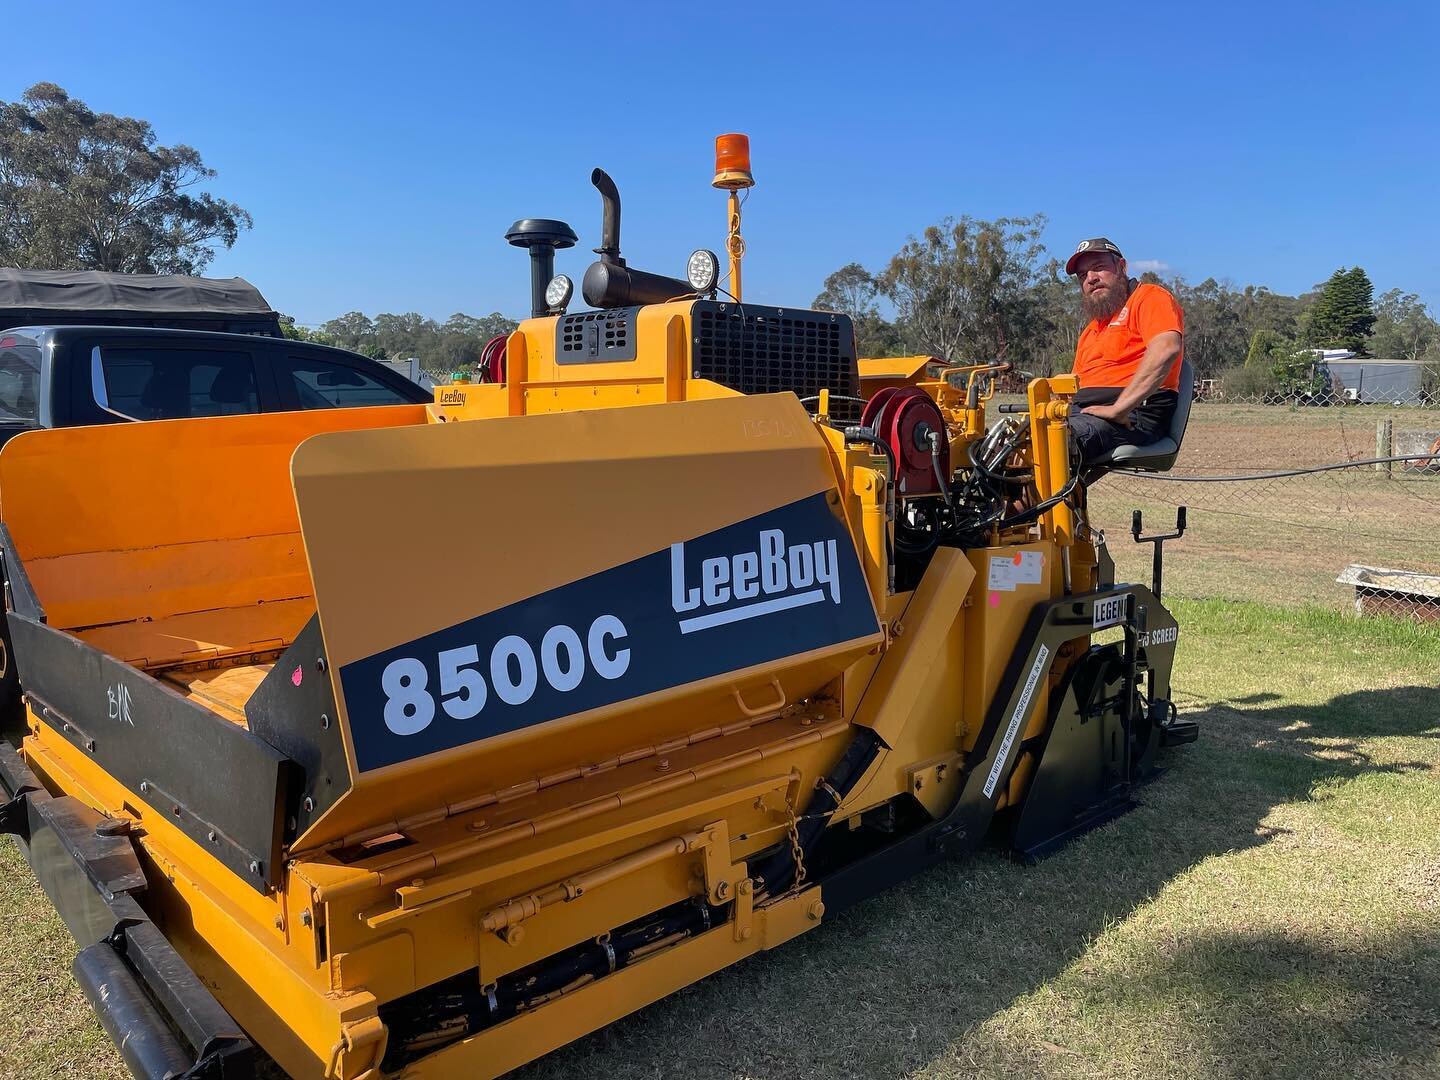 Well, well, well, look who's arrived! Our new Leeboy Paver has graced us with her presence!

Now, it's time for us to put our thinking caps on and figure out the ins and outs of this magnificent machine. A little bit of a challenge, but nothing we ca